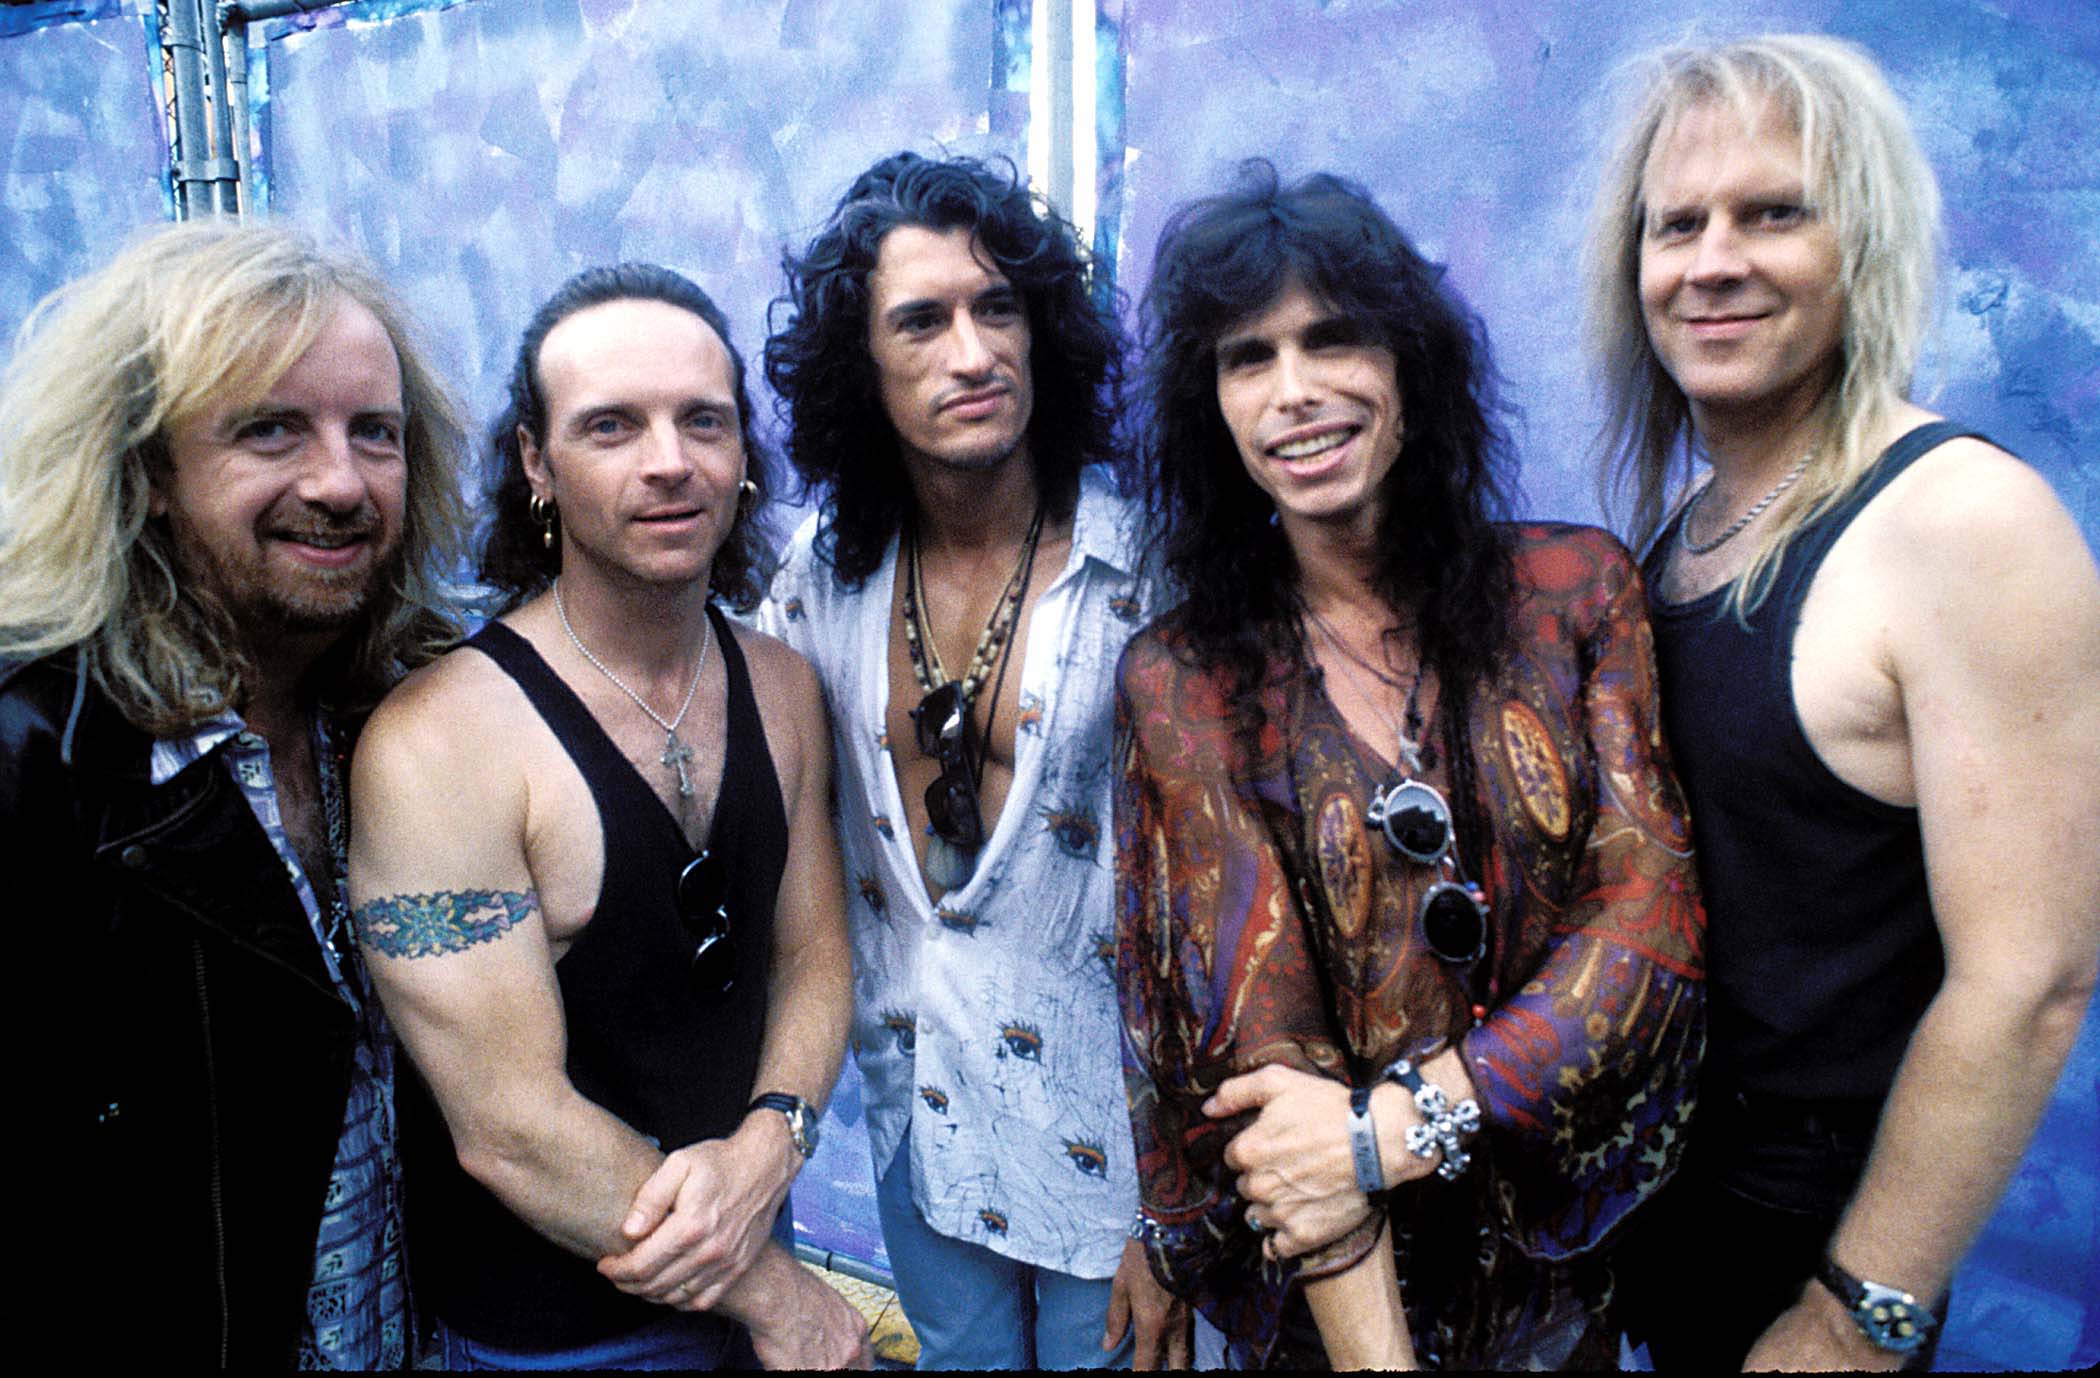 Aerosmith's Brad Whitford, Joey Kramer, Joe Perry, Steven Tyler, and Tom Hamilton standing in front of a wall